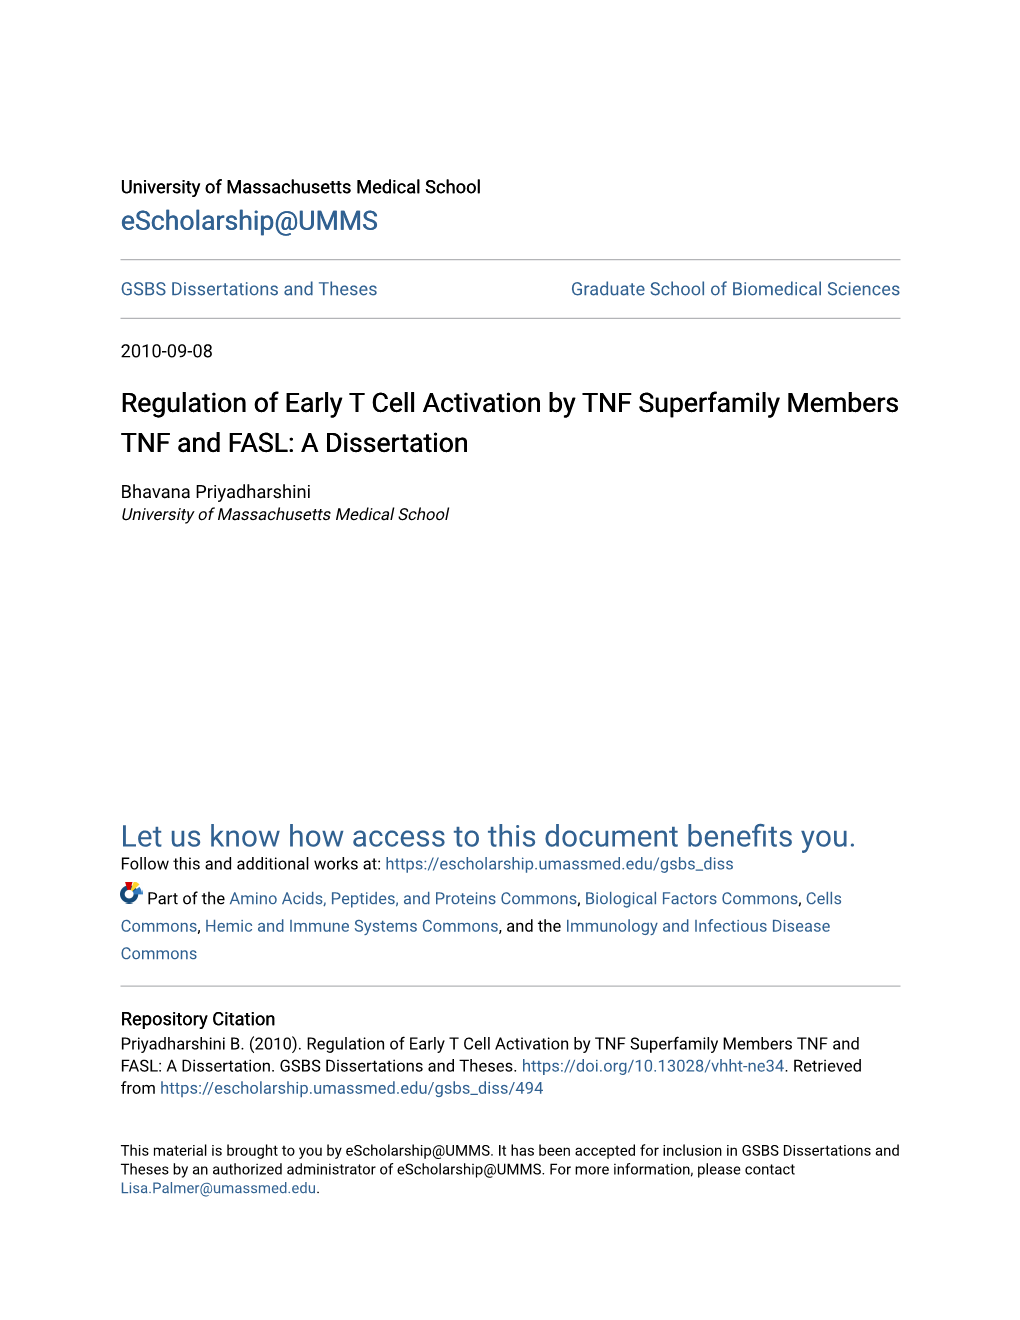 Regulation of Early T Cell Activation by TNF Superfamily Members TNF and FASL: a Dissertation